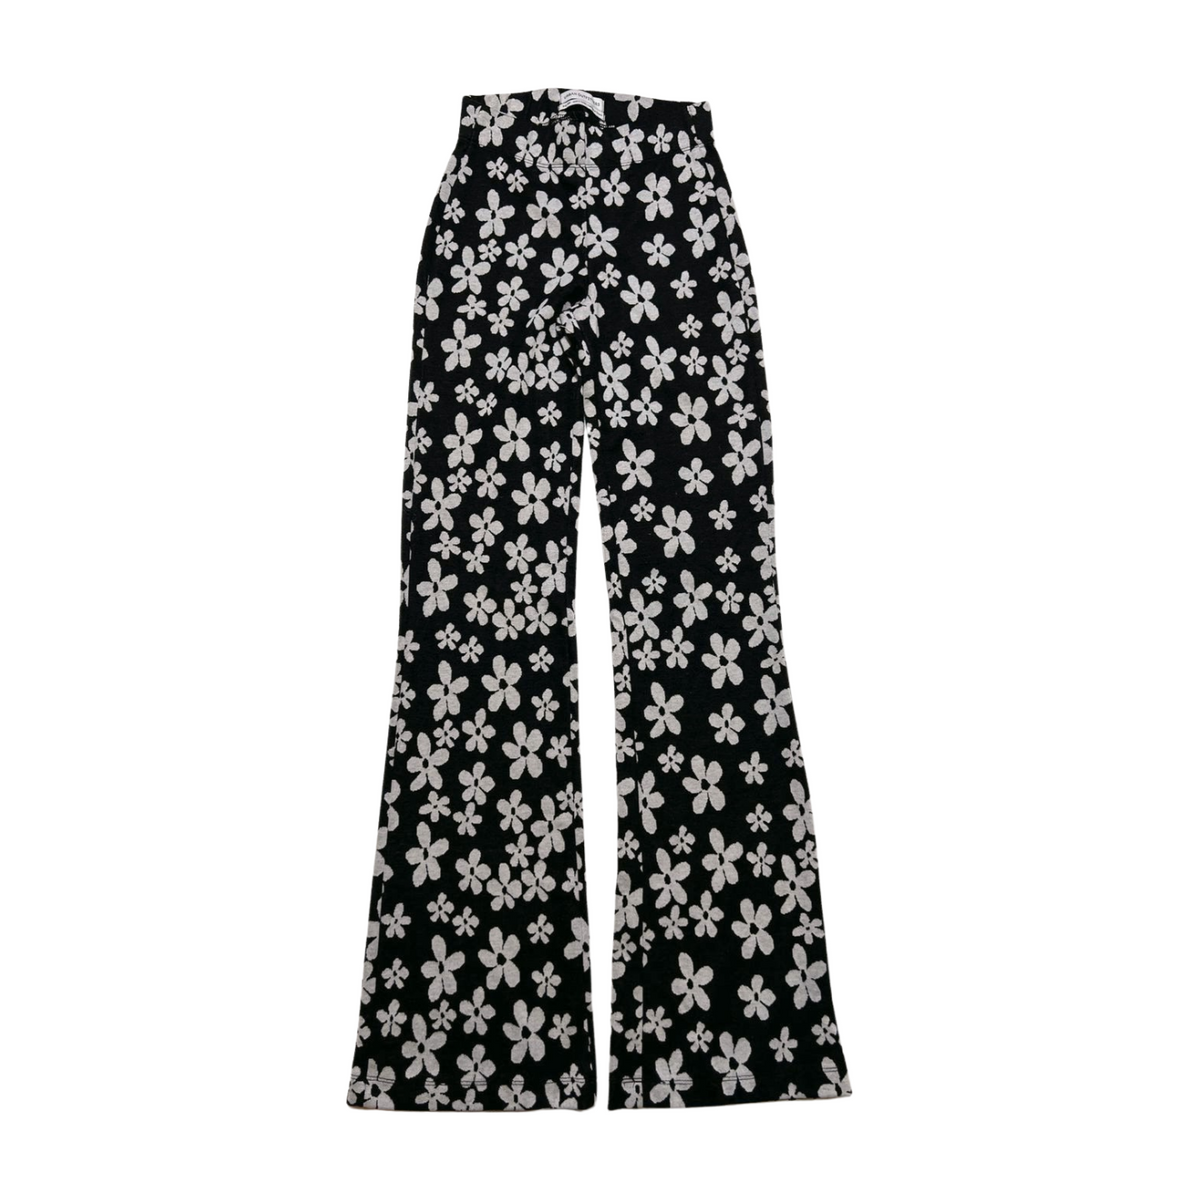 Urban Outfitters- Black Floral Flare Pants